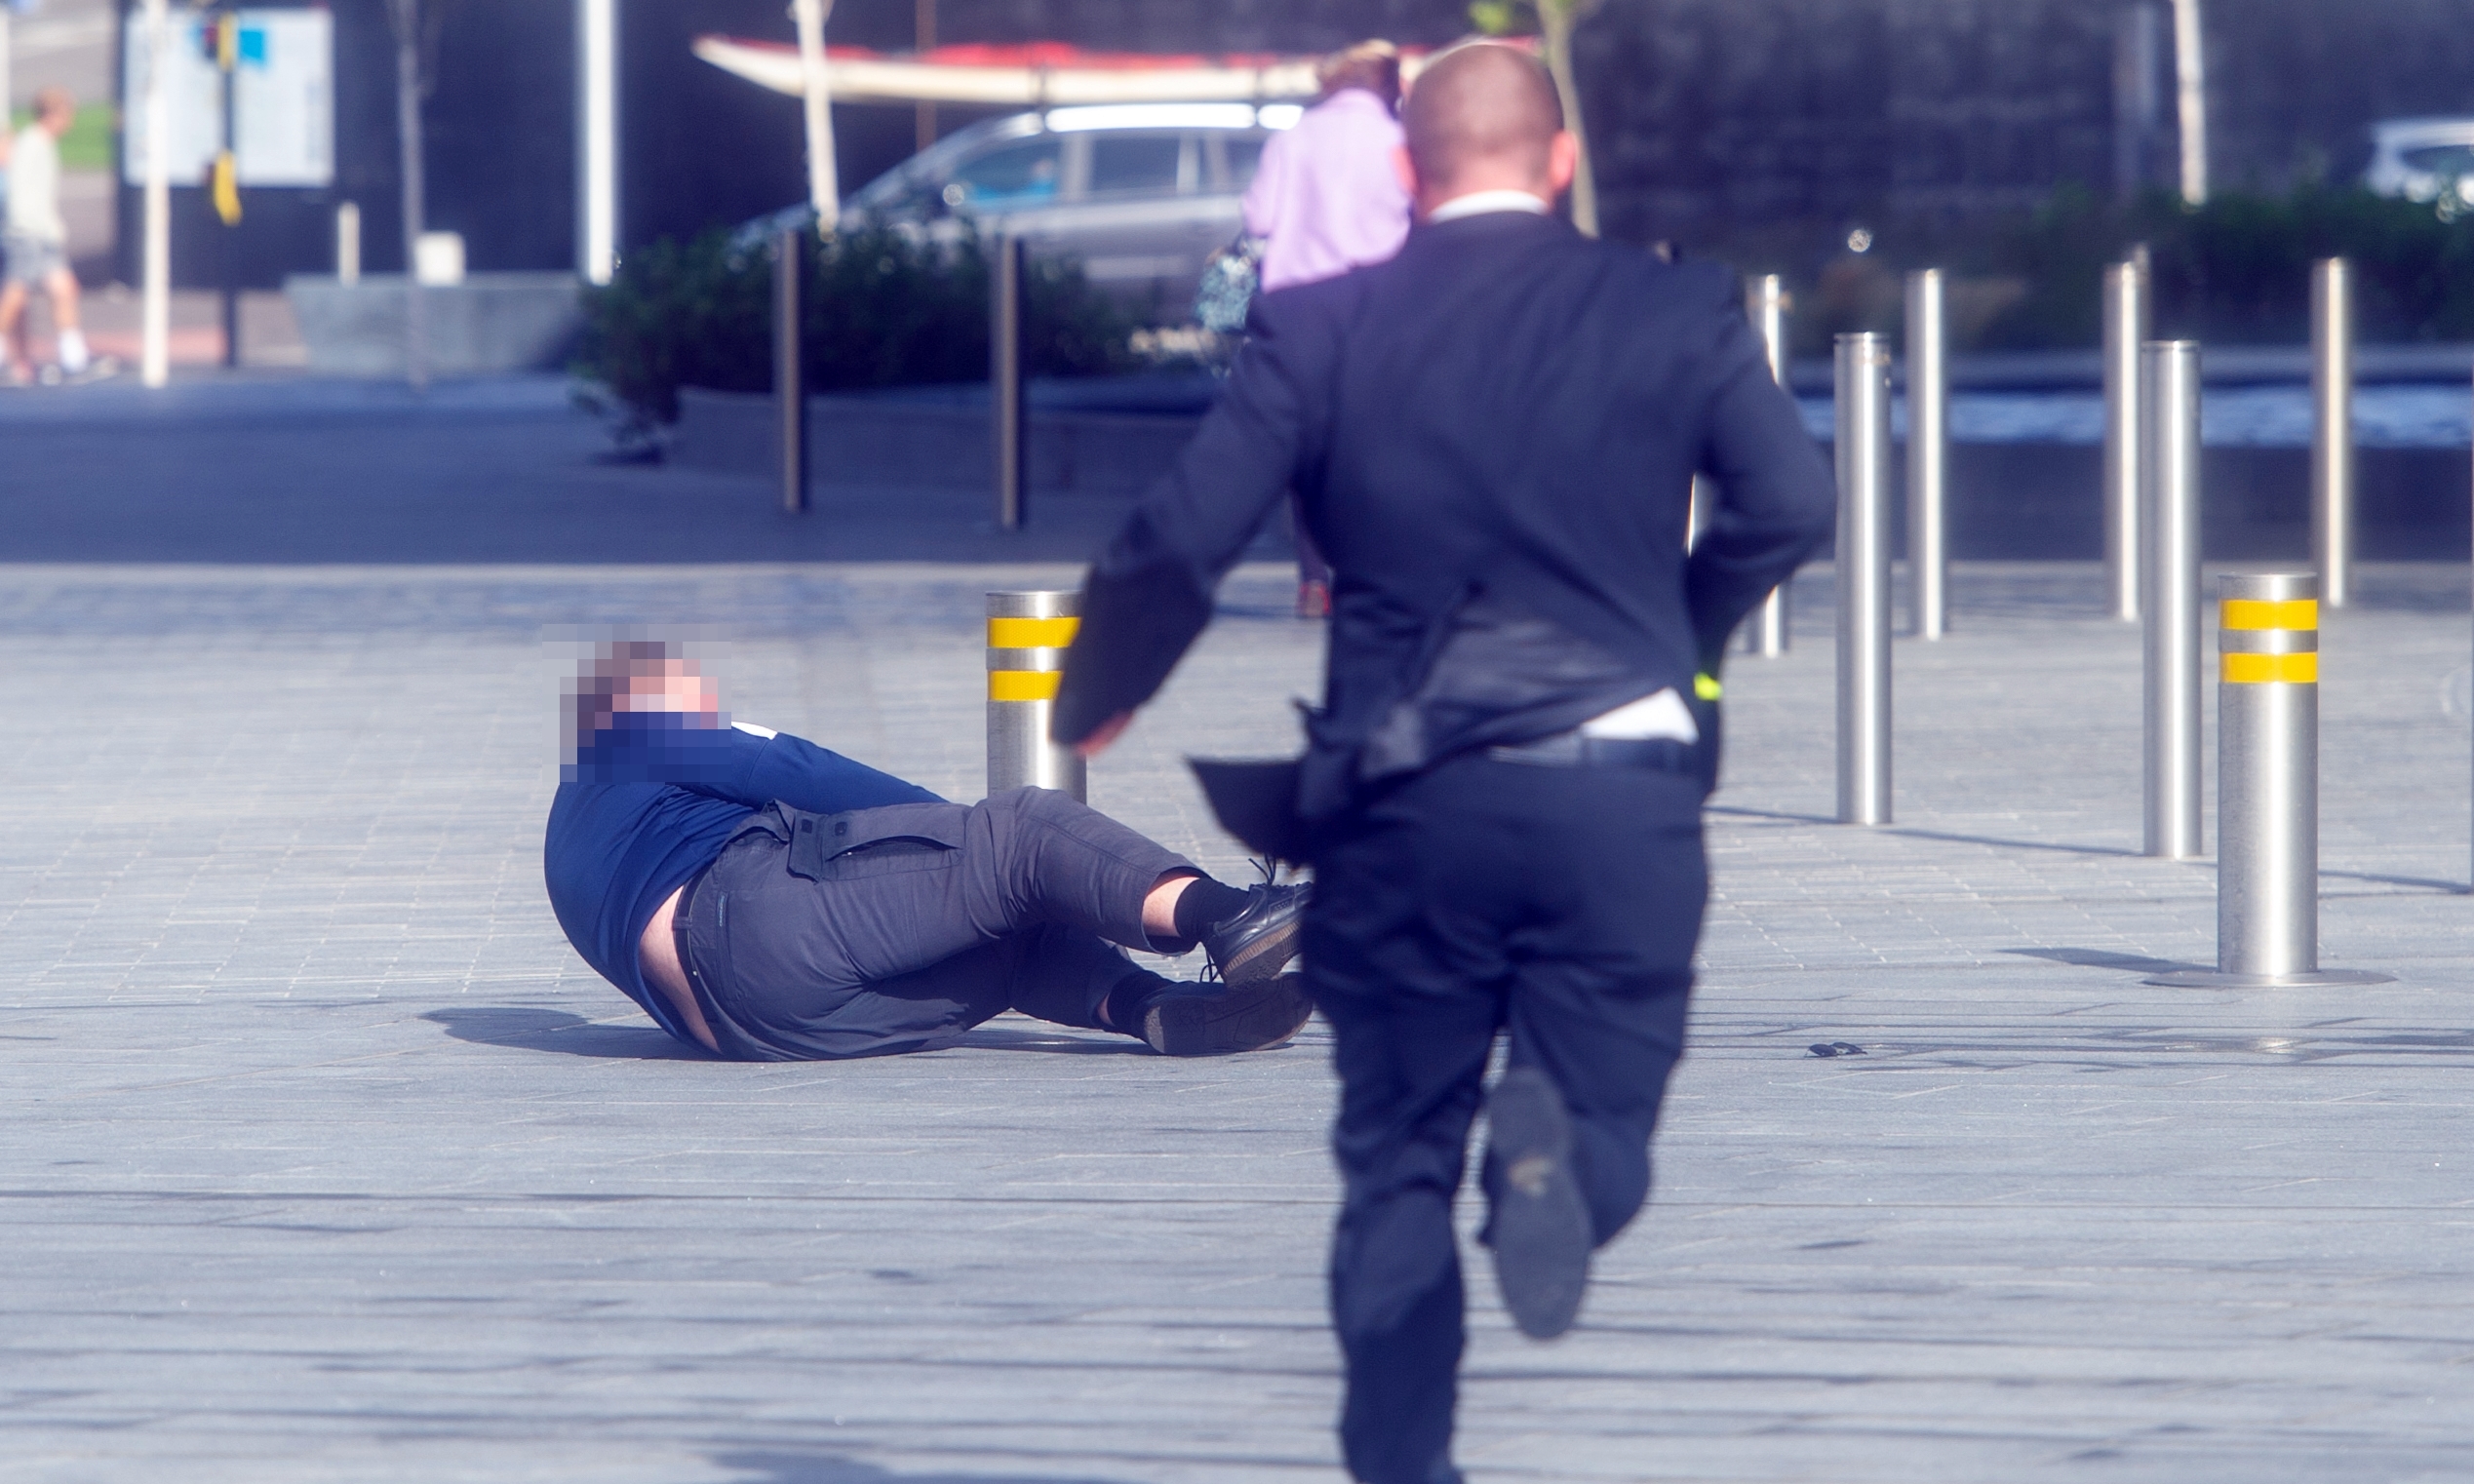 A man rushes to help after another man was swept off his feet by the strong wind outside V&A Dundee.